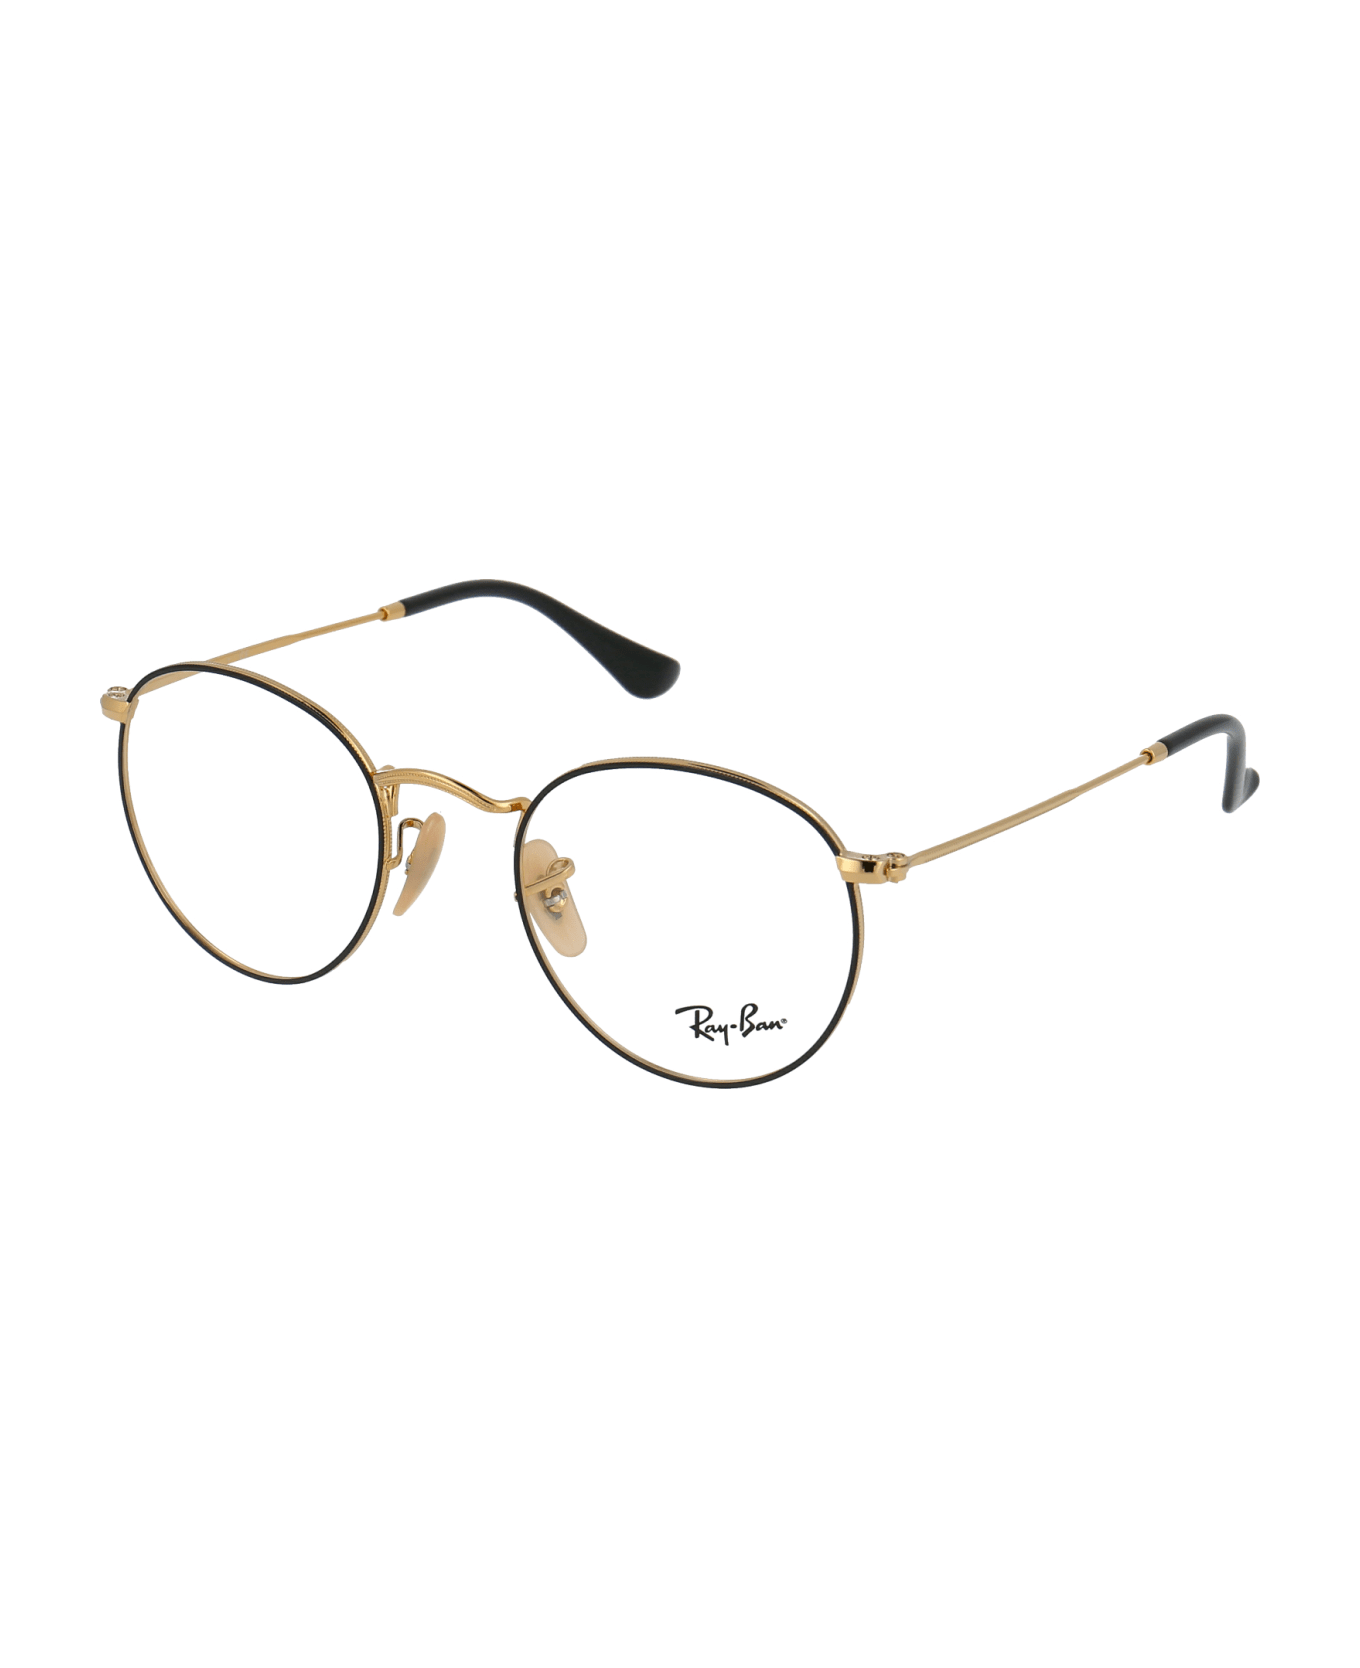 Ray-Ban Round Metal Glasses - 2991 Black On Gold